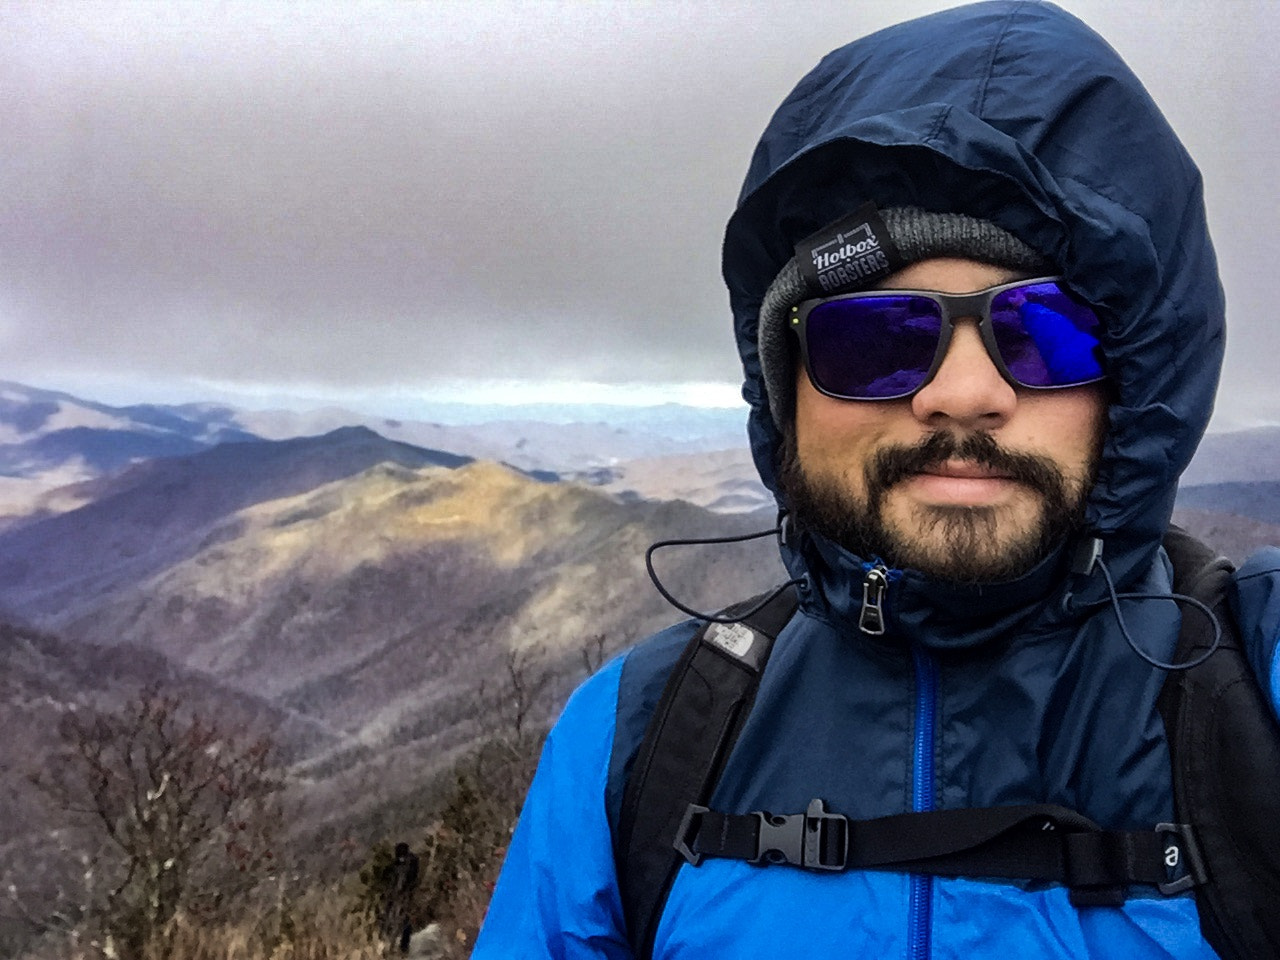 Apple iPhone 6 + iPhone 6 front camera 2.65mm f/2.2 sample photo. Throw back to icy trail, high wind and epic views on top of sam's knob. photography